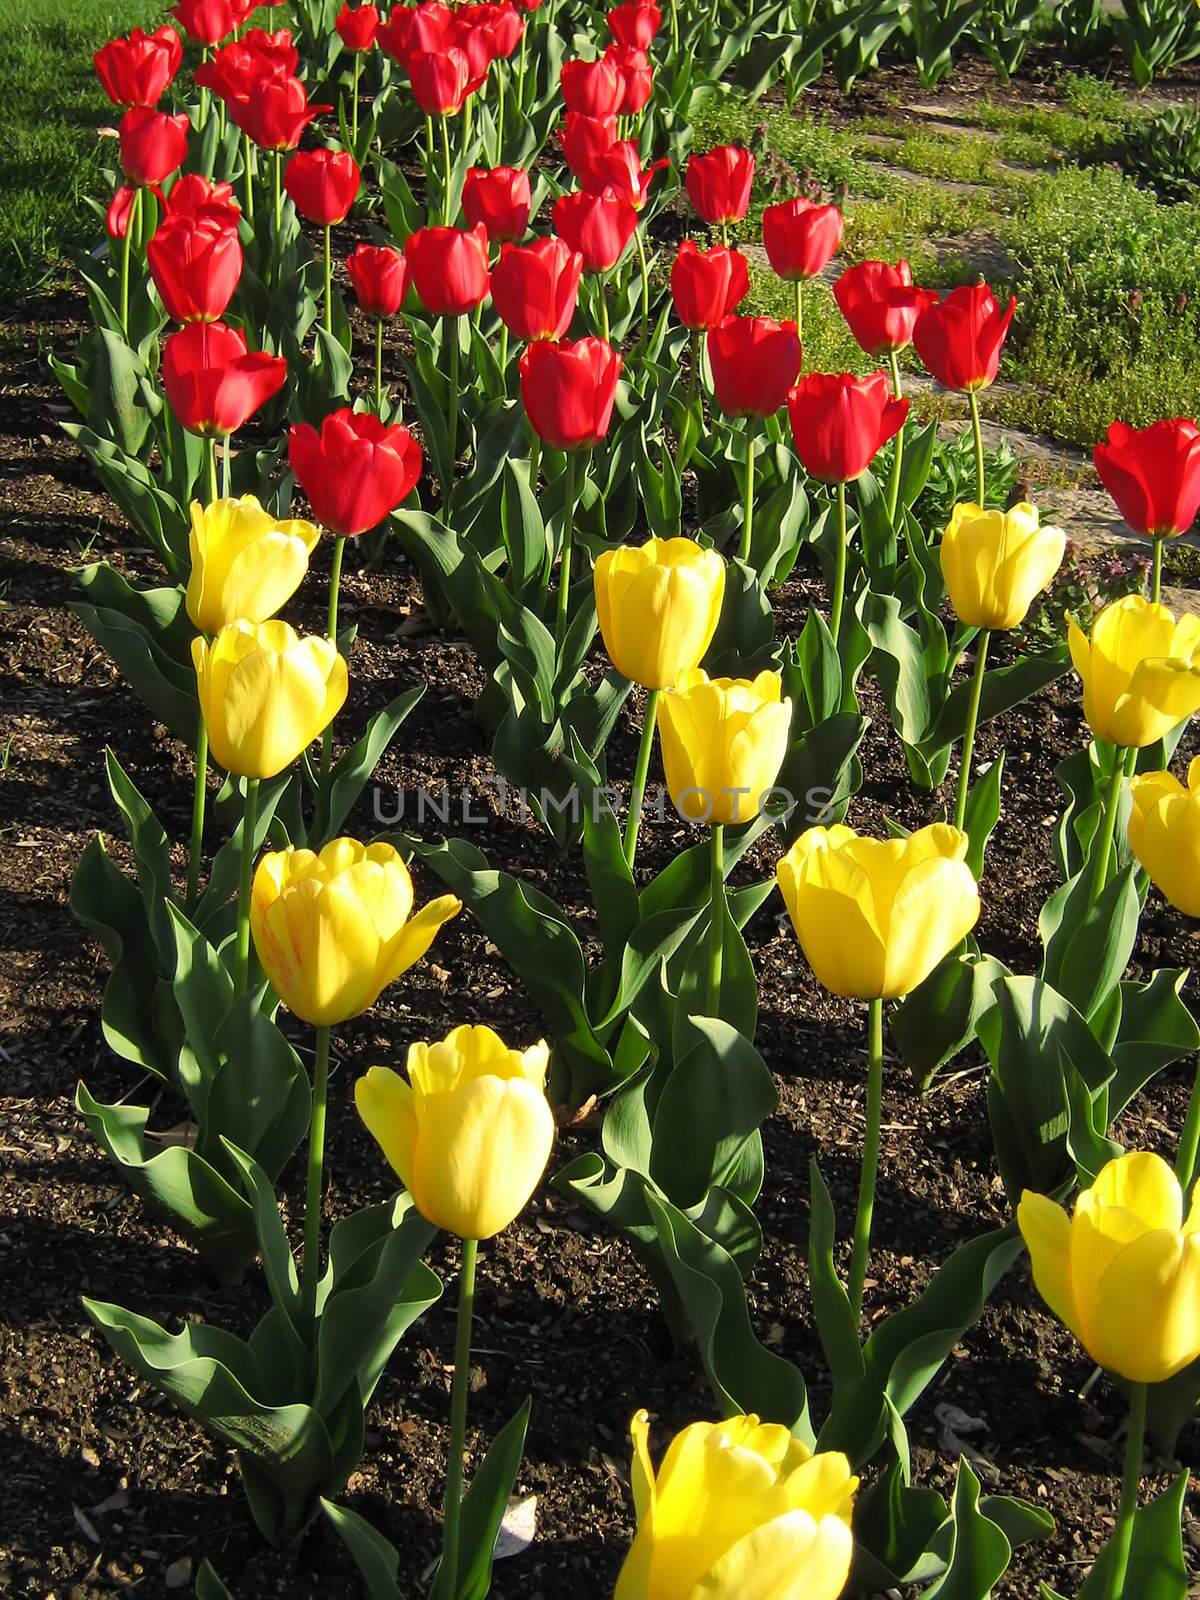 Red And Yellow Tulips by llyr8